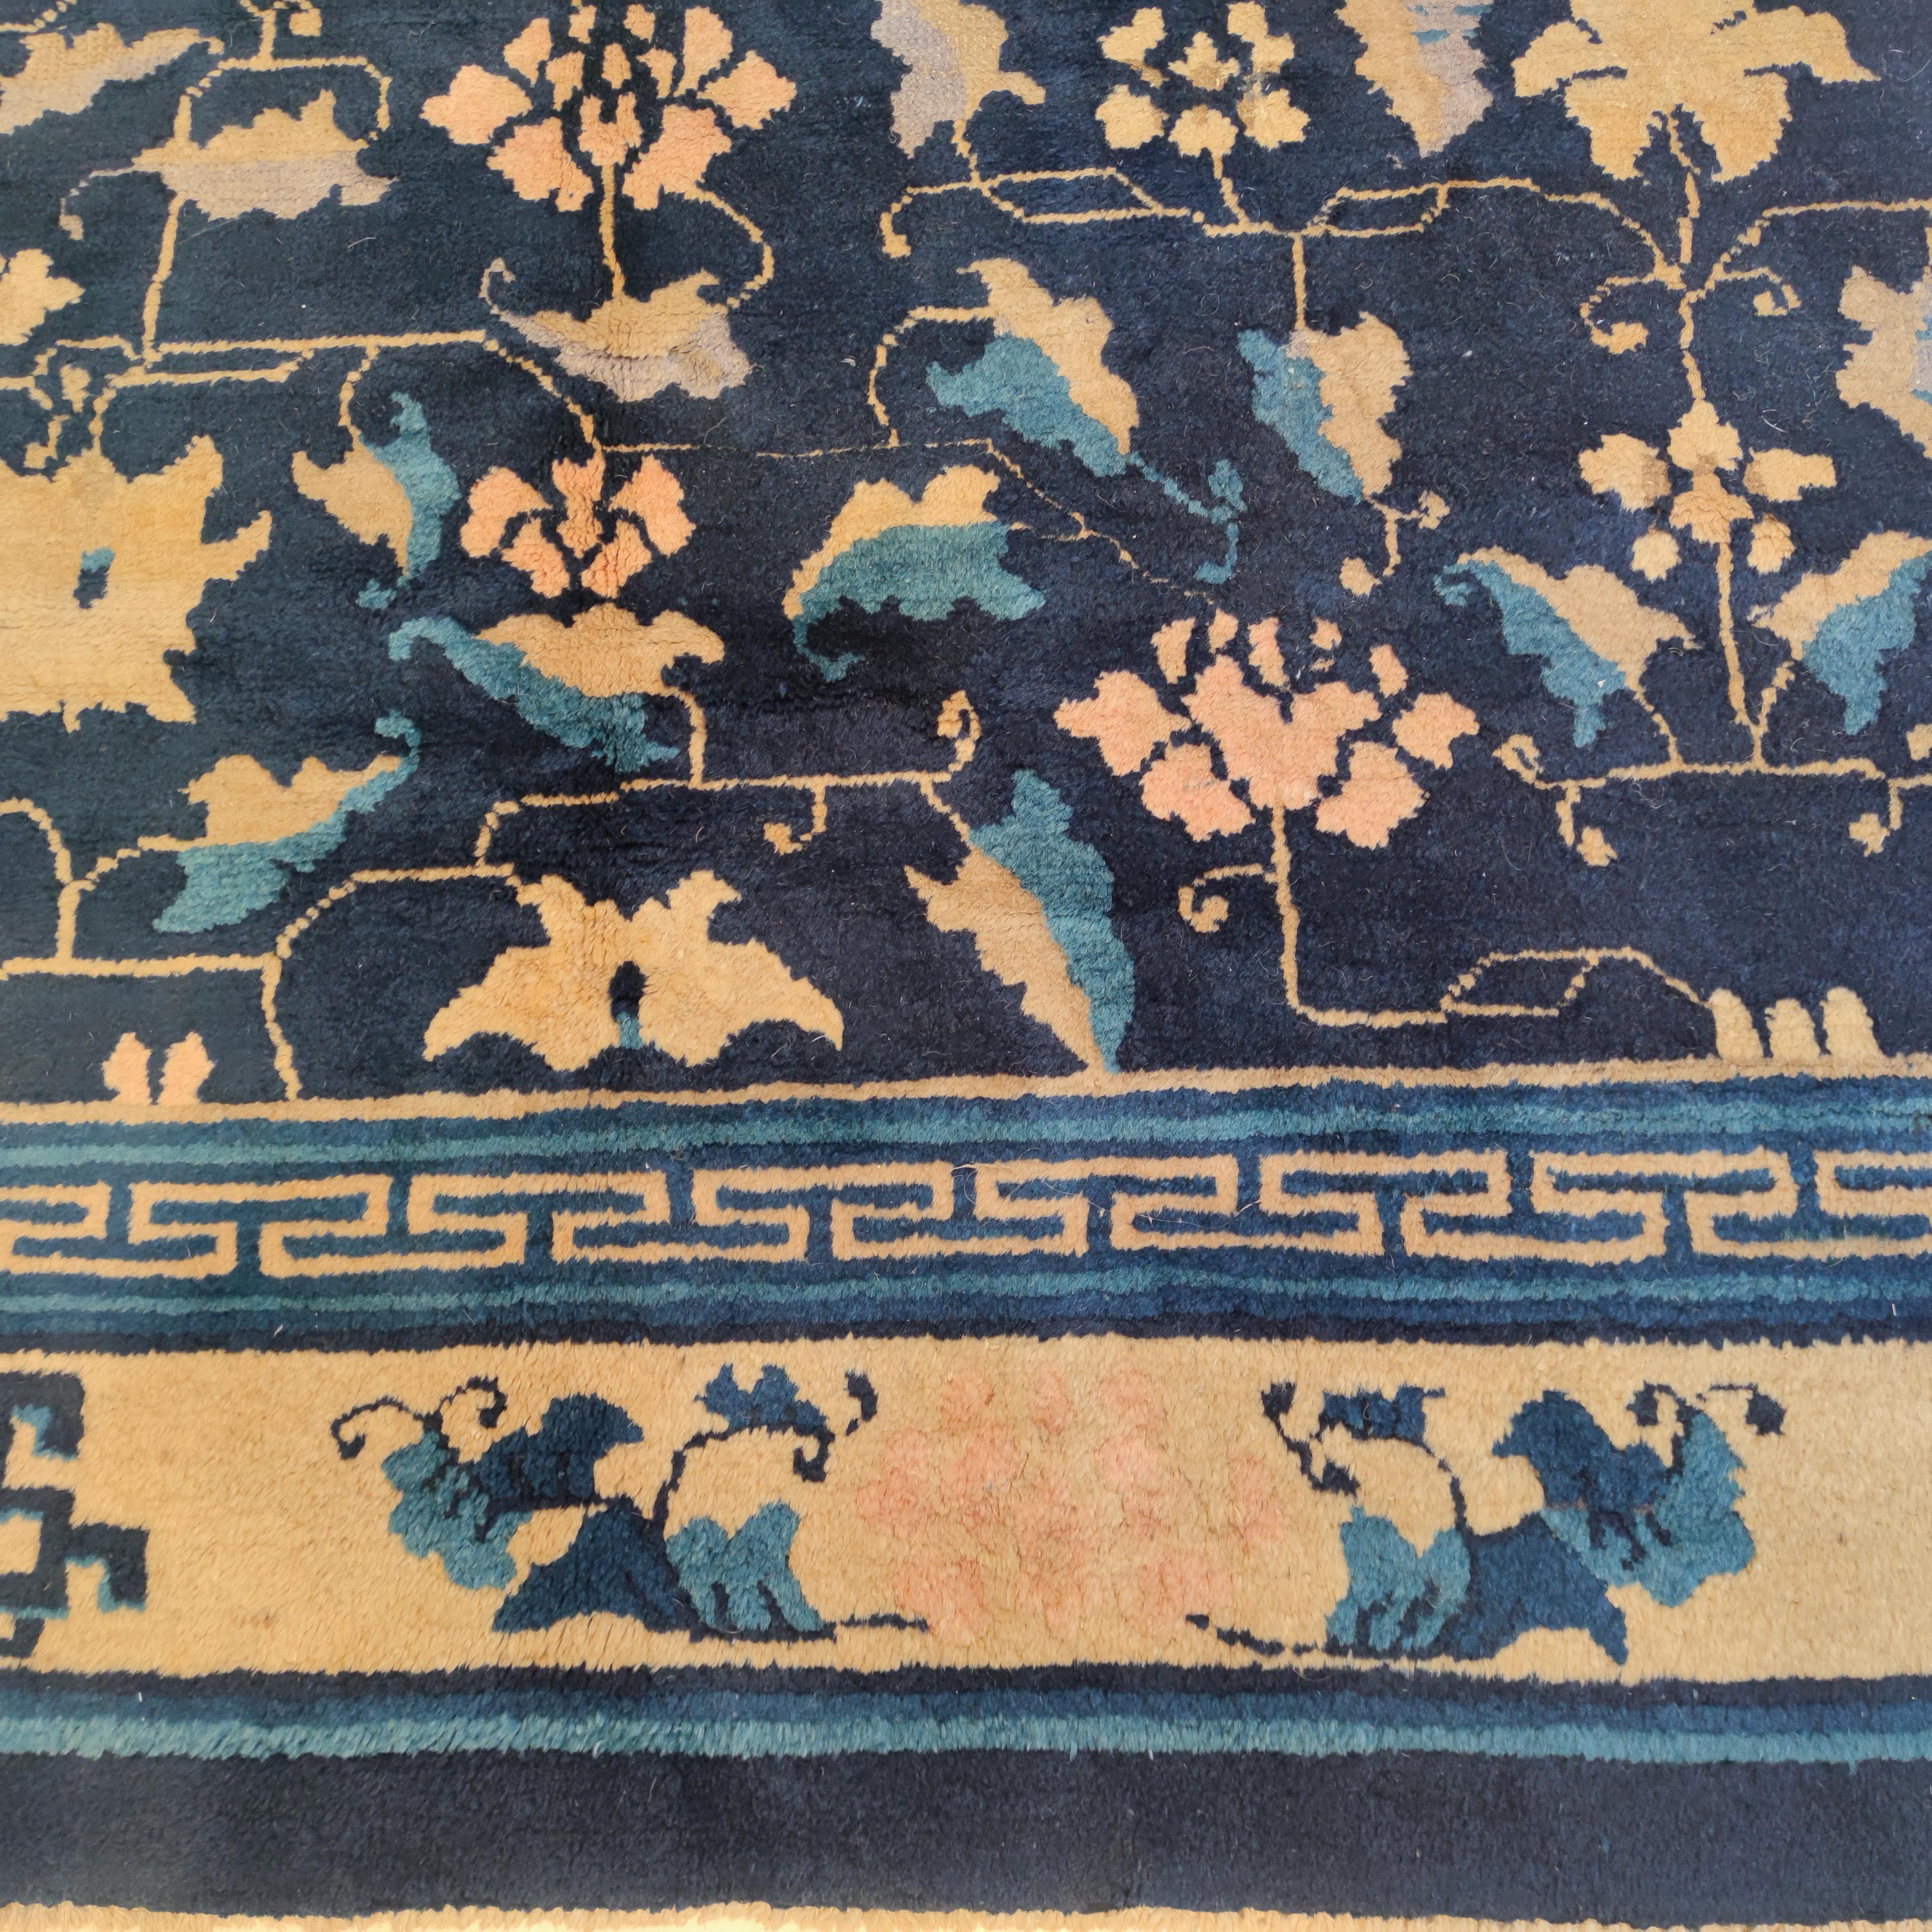 A very finely woven antique Chinese rug woven in the Imperial workshops of Peking. Distinguished by an elegant pattern of scrolling lotus flowers on an indigo background, this type represents the highest quality of weaving originating from China